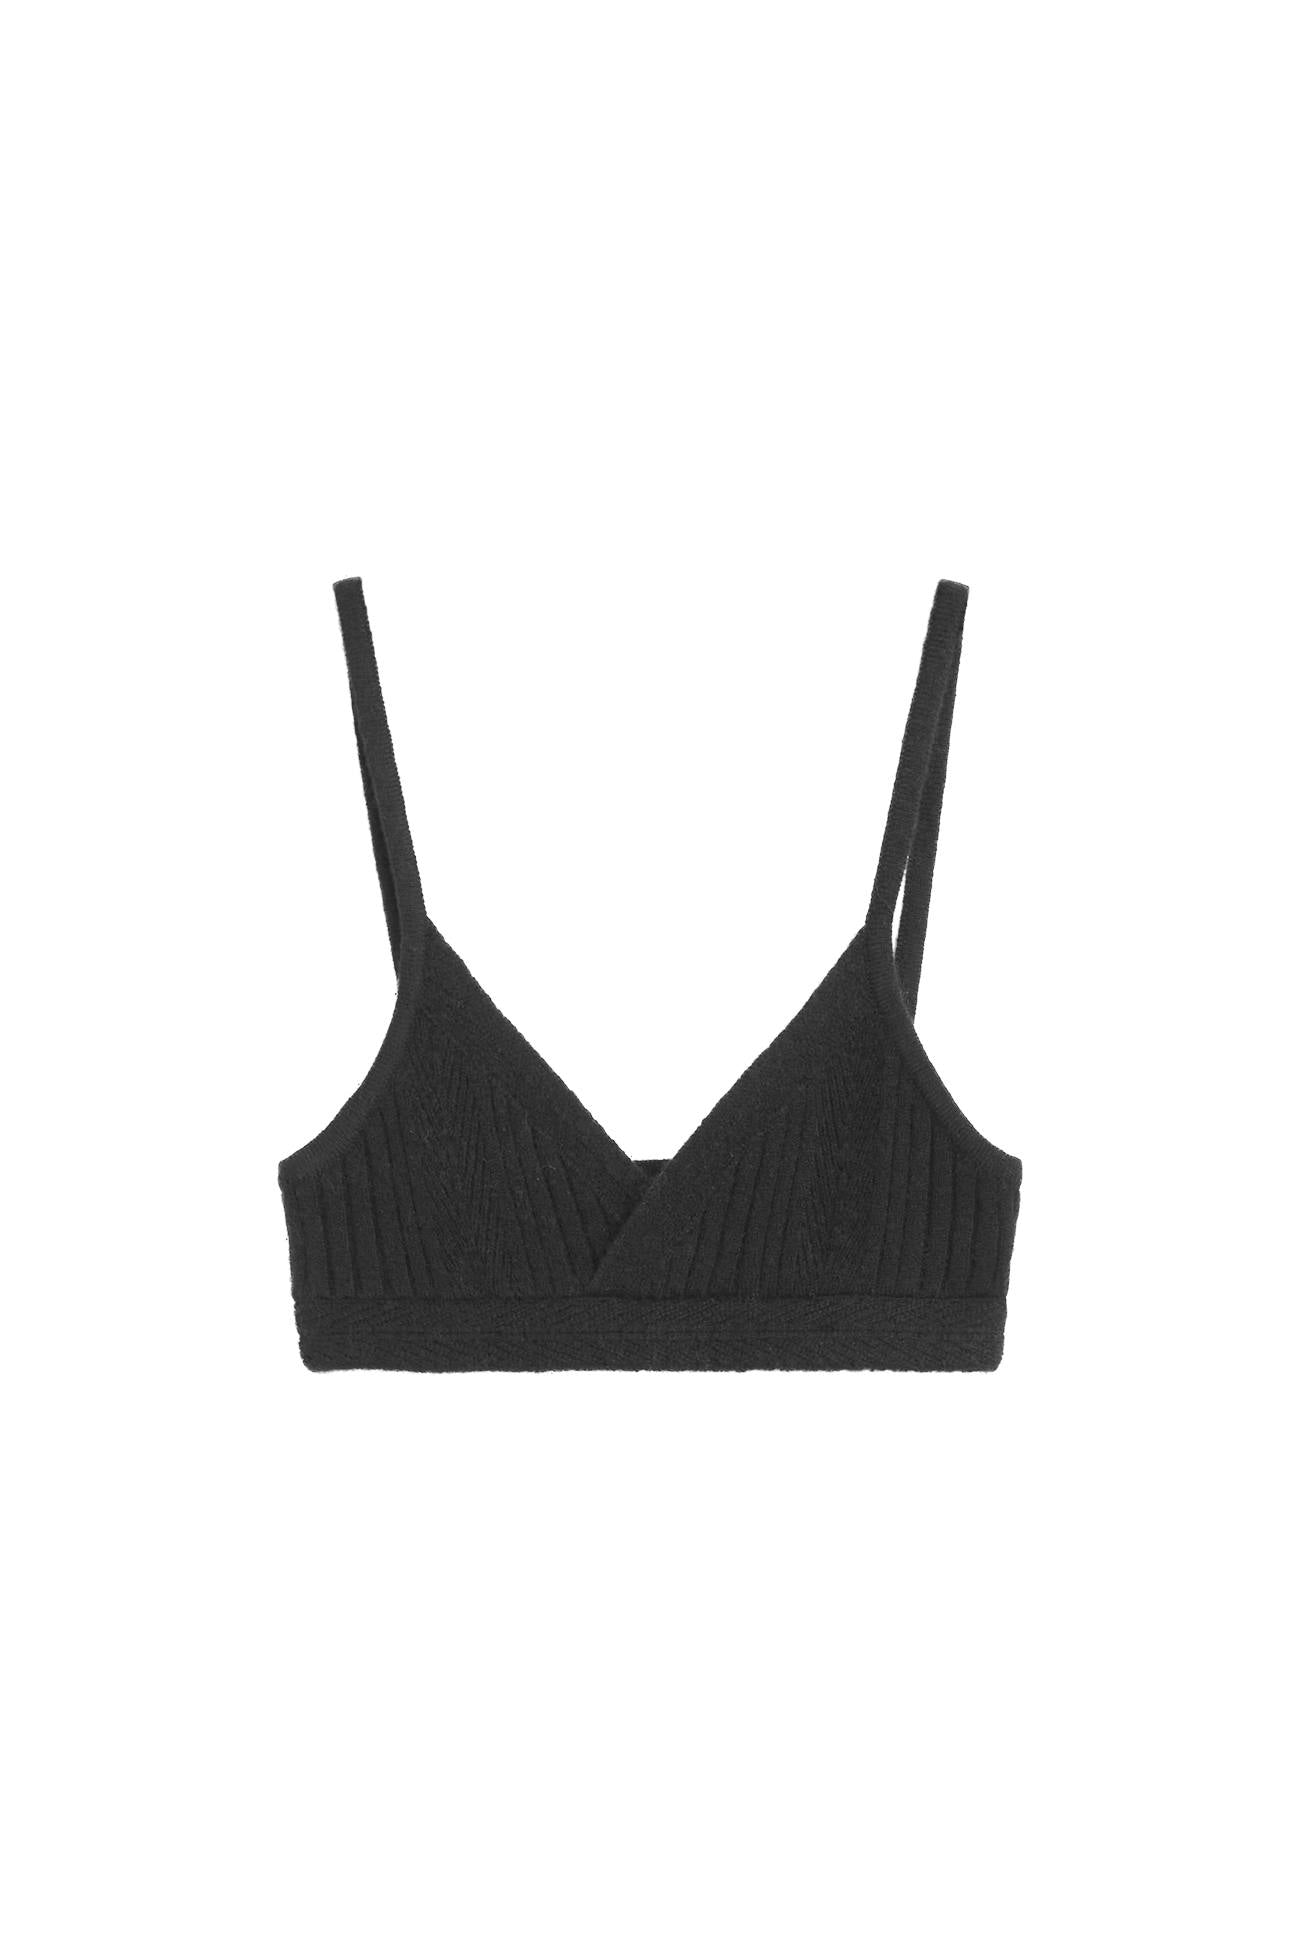 Cashmere Bra Bralette Camisole Black Ready to Ship From Vintage